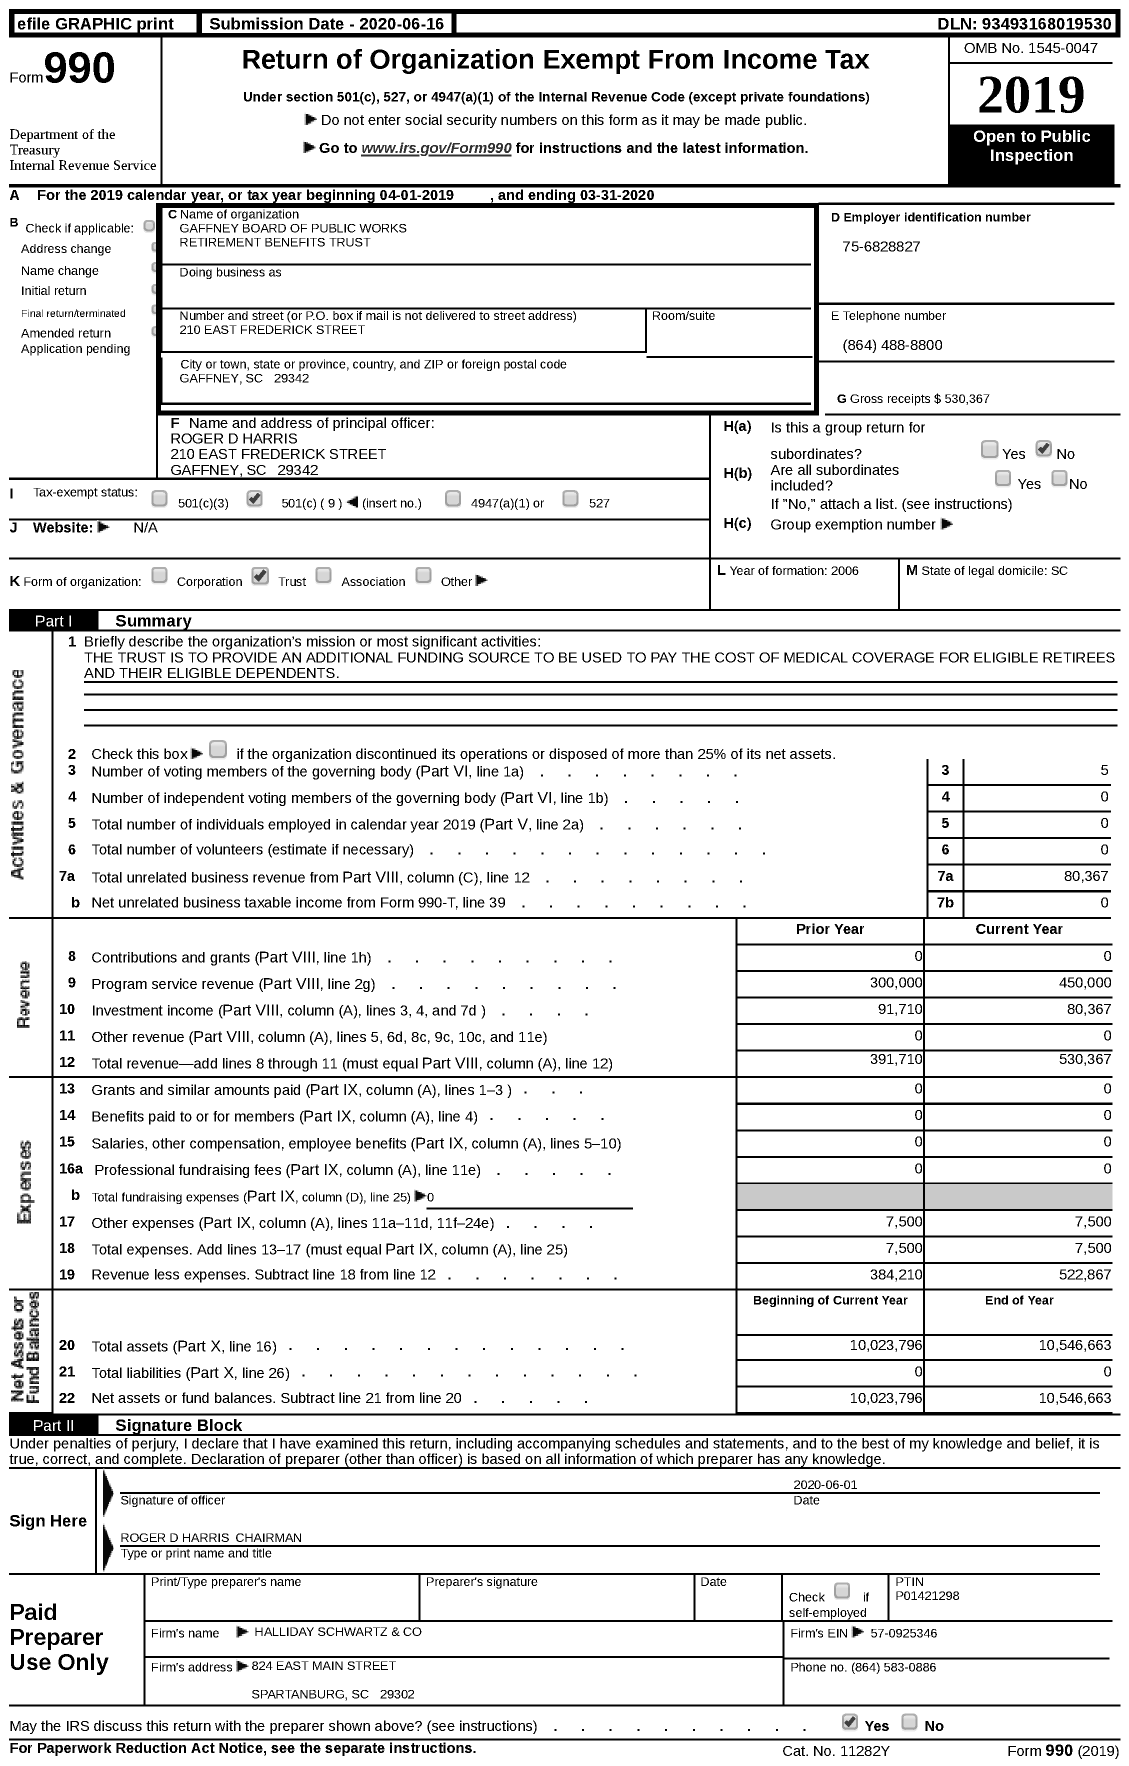 Image of first page of 2019 Form 990 for Gaffney Board of Public Works Retirement Benefits Trust